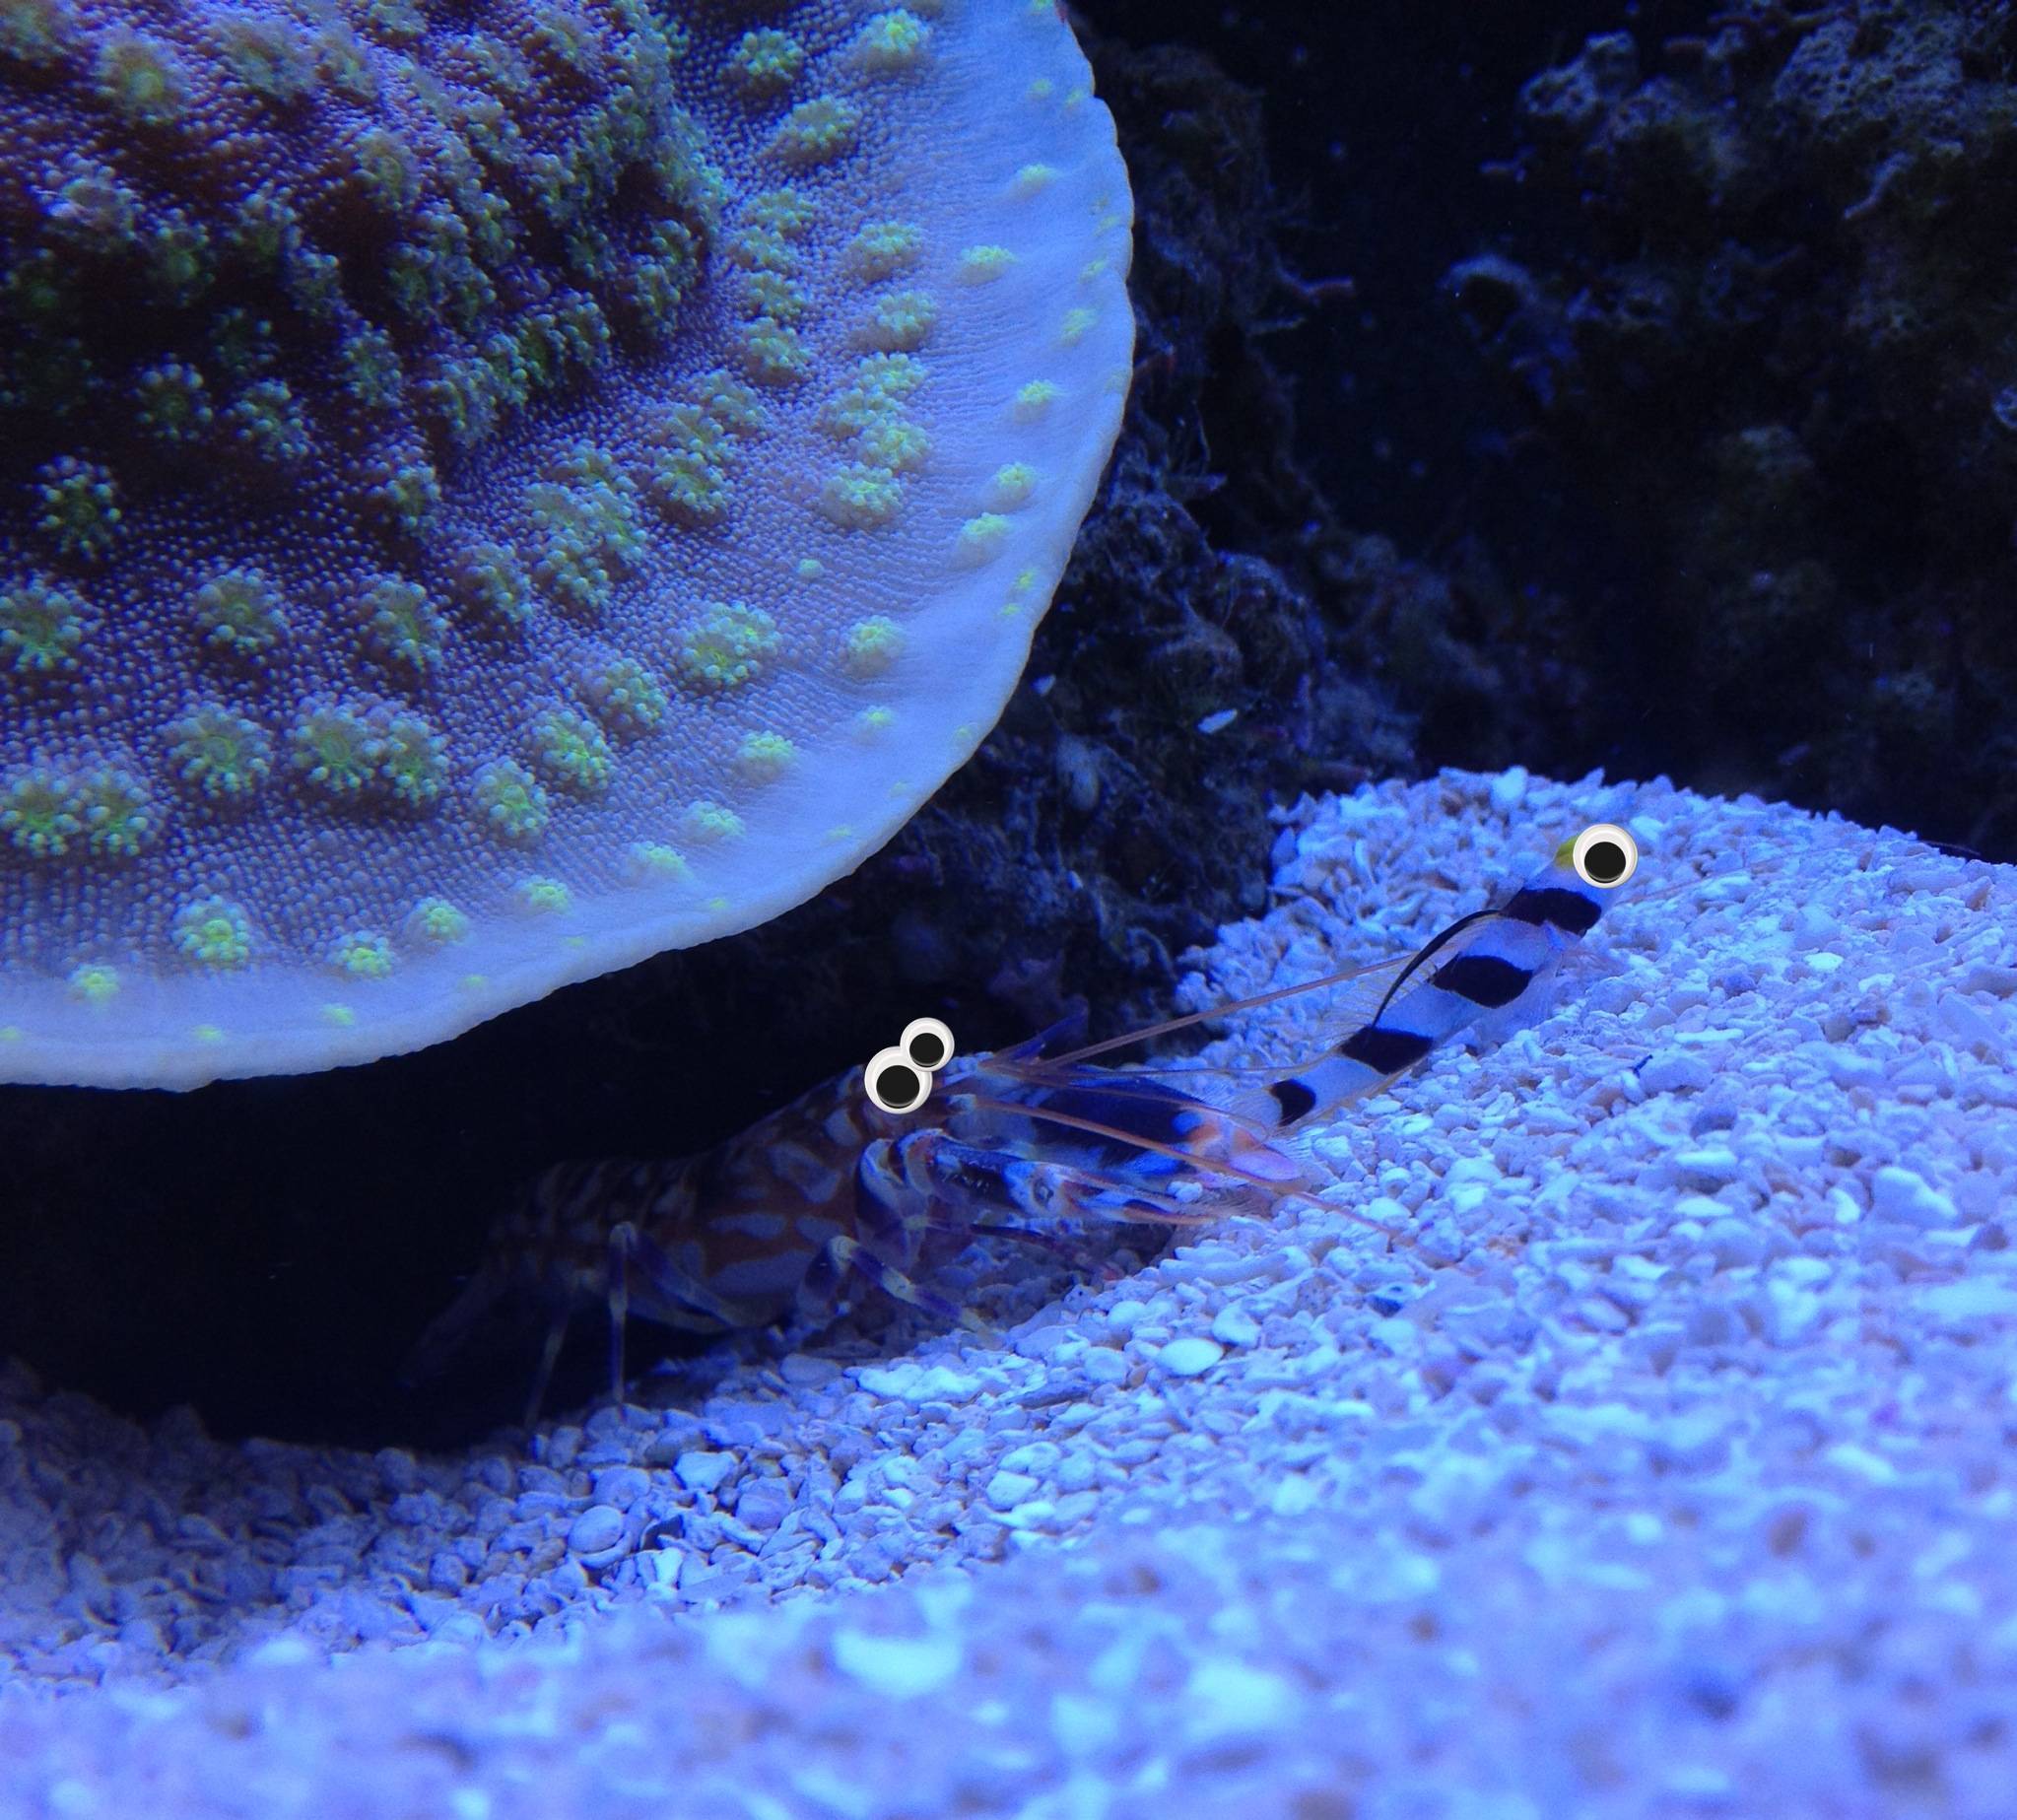 My Black Ray Hi Fin Goby And Tiger Pistol Shrimp Adjusted For